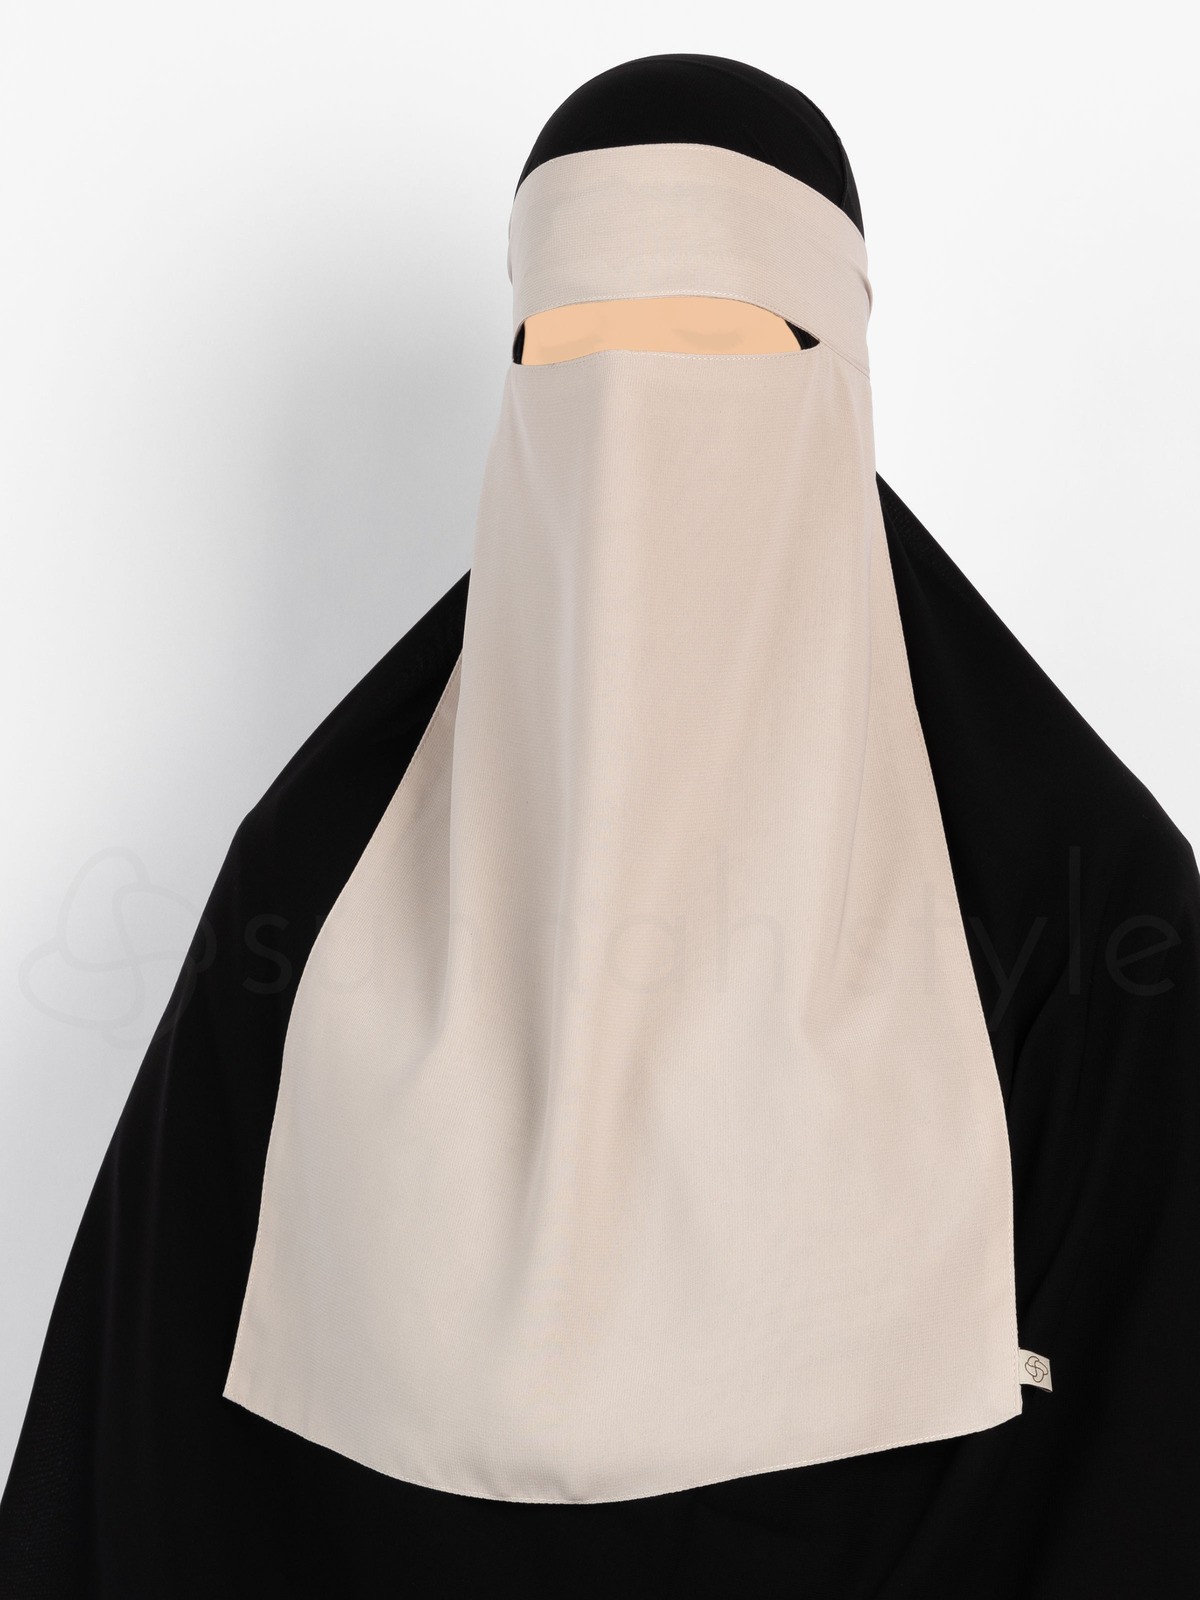 Sunnah Style - One Layer Niqab (Pine)